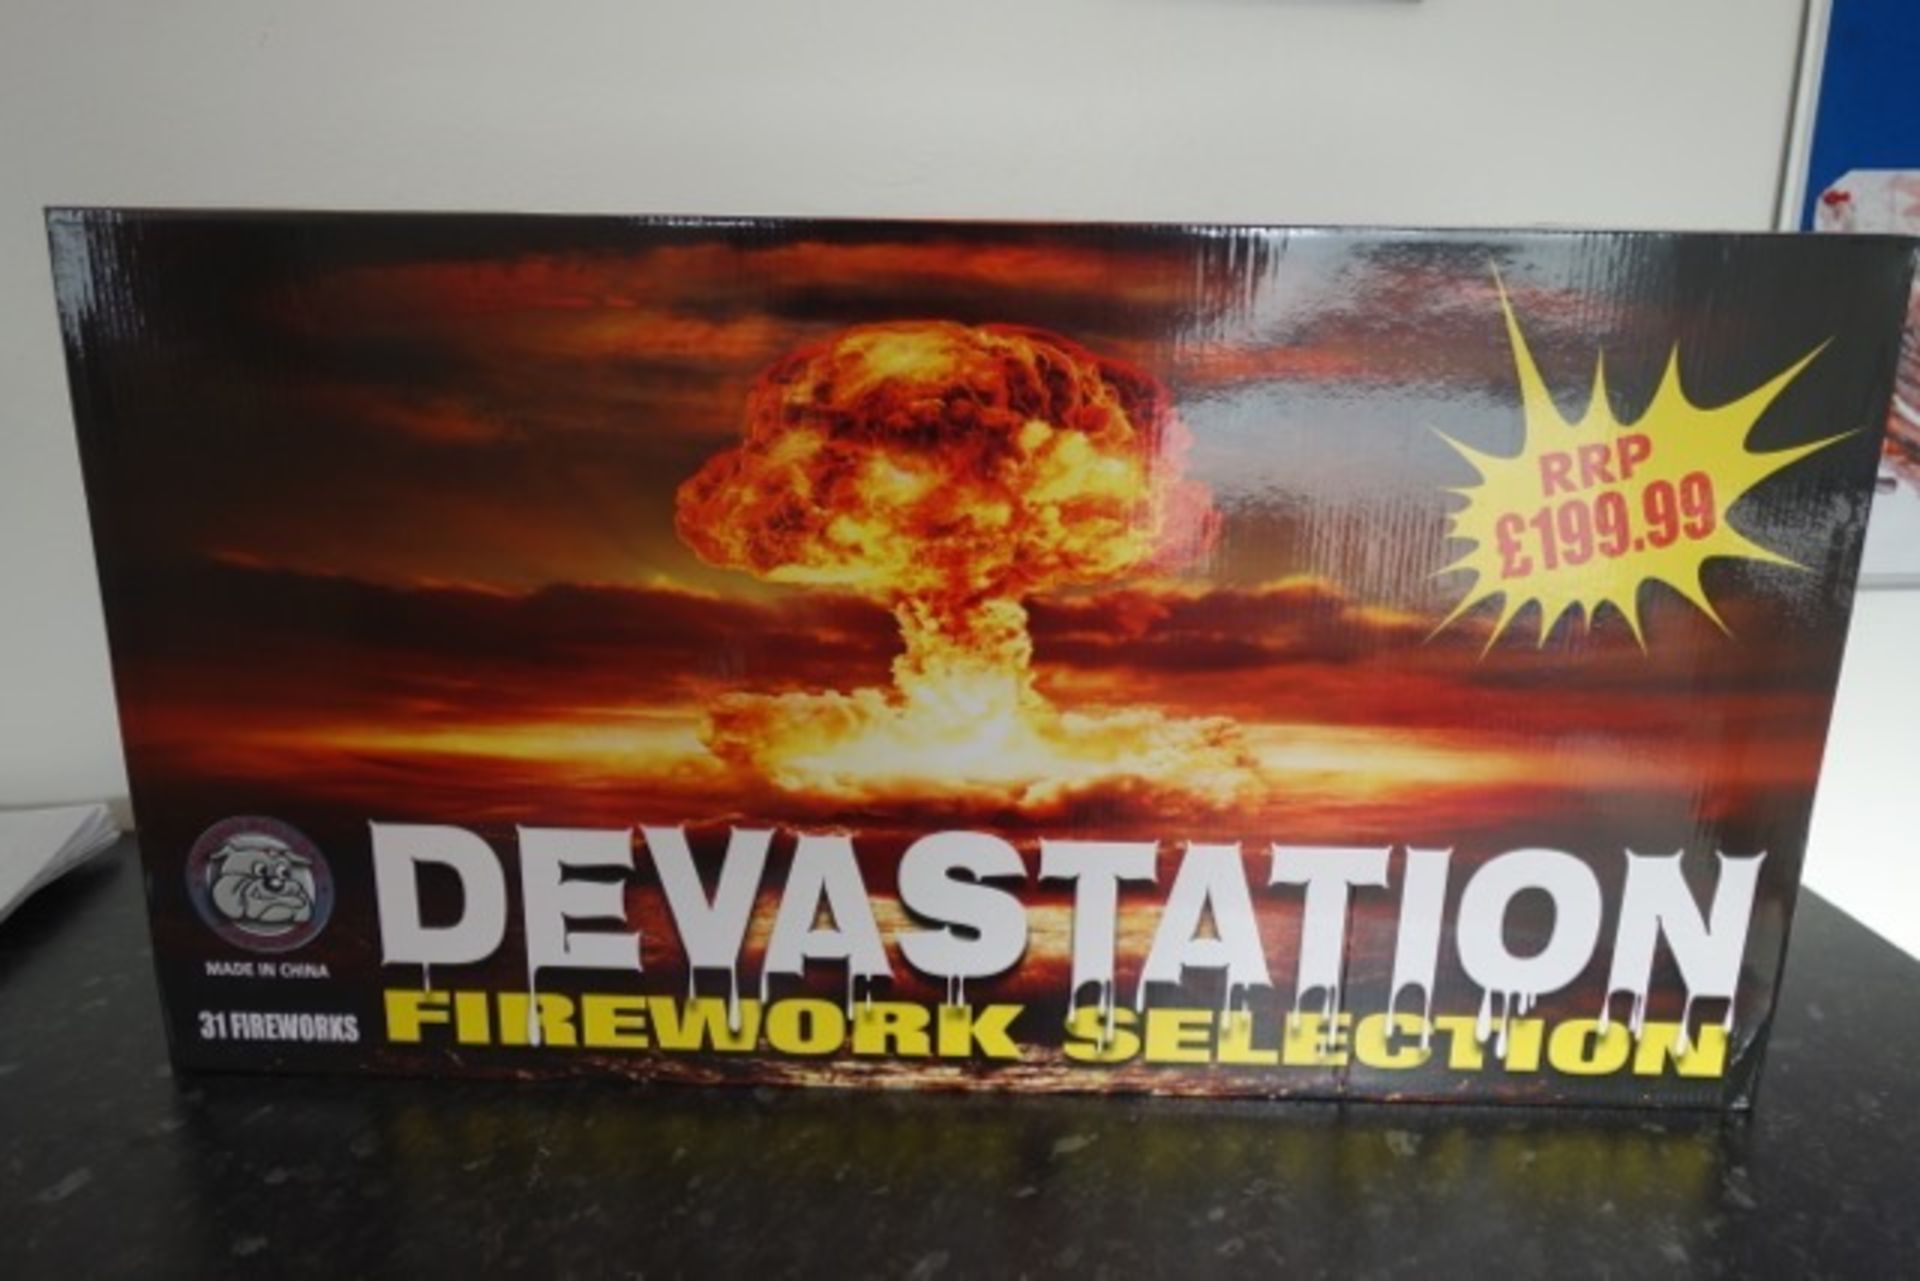 3 x DEVASTATION ULTIMATE SELECTION BOX BY BRITISH BULLDOG FIREWORK COMPANY - THIS YEARS NEW LOOK - Image 3 of 3